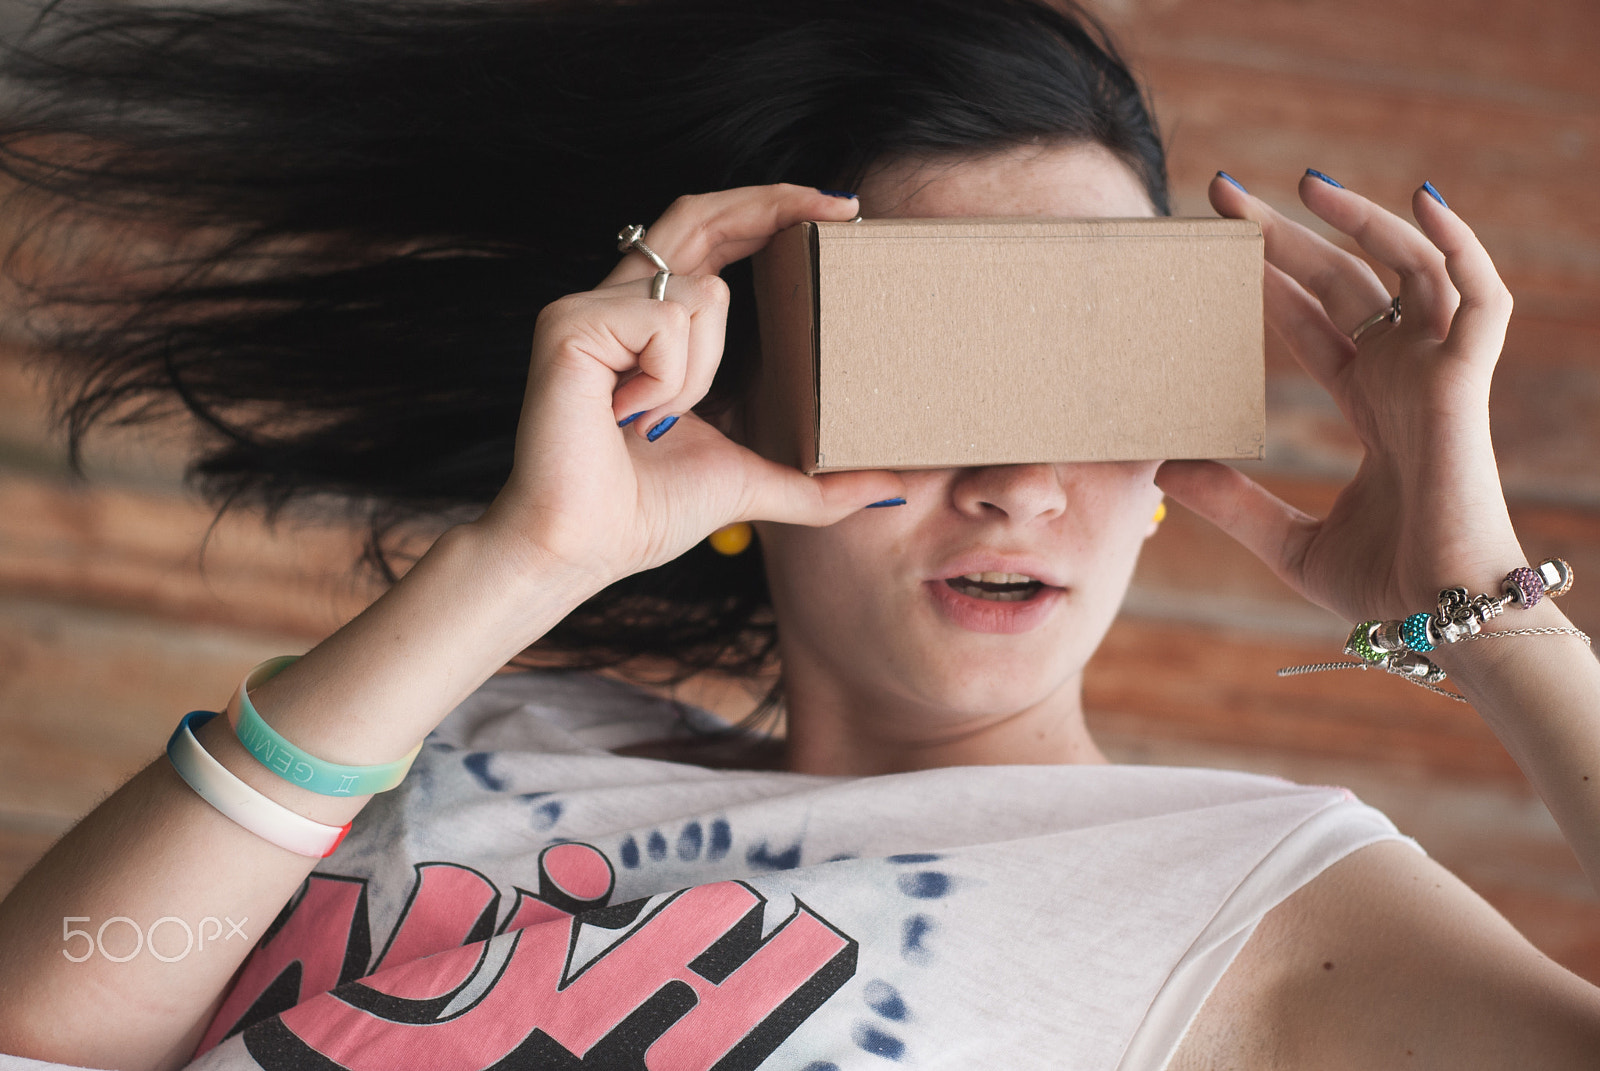 Nikon D80 + AF Nikkor 50mm f/1.8 N sample photo. Young girl having fun playing with your cardboard vr headset attached to her smartphone photography